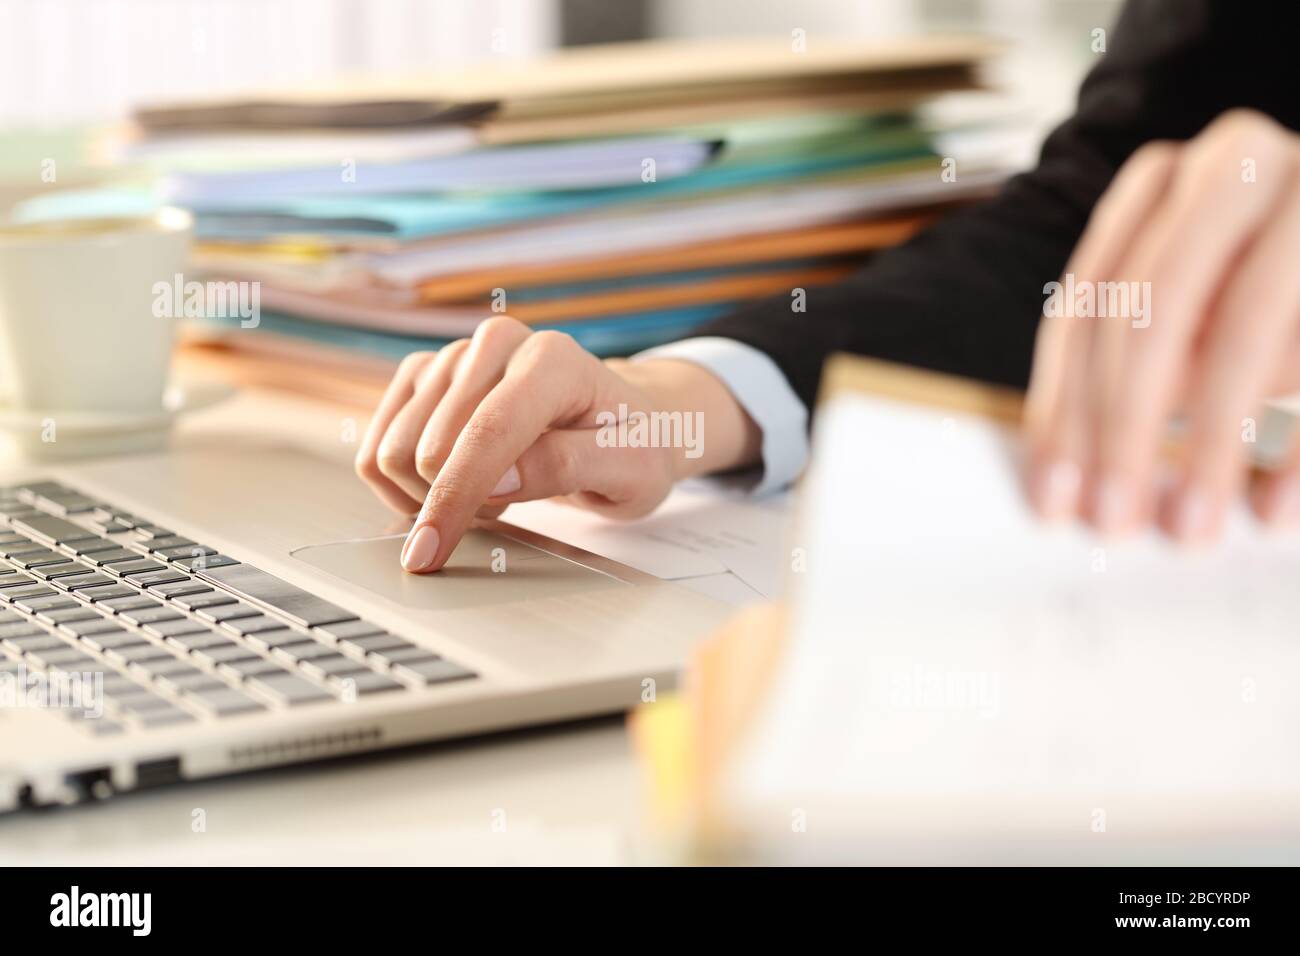 Close up of overworked executive woman hands checking documents using laptop on a desk at the office Stock Photo